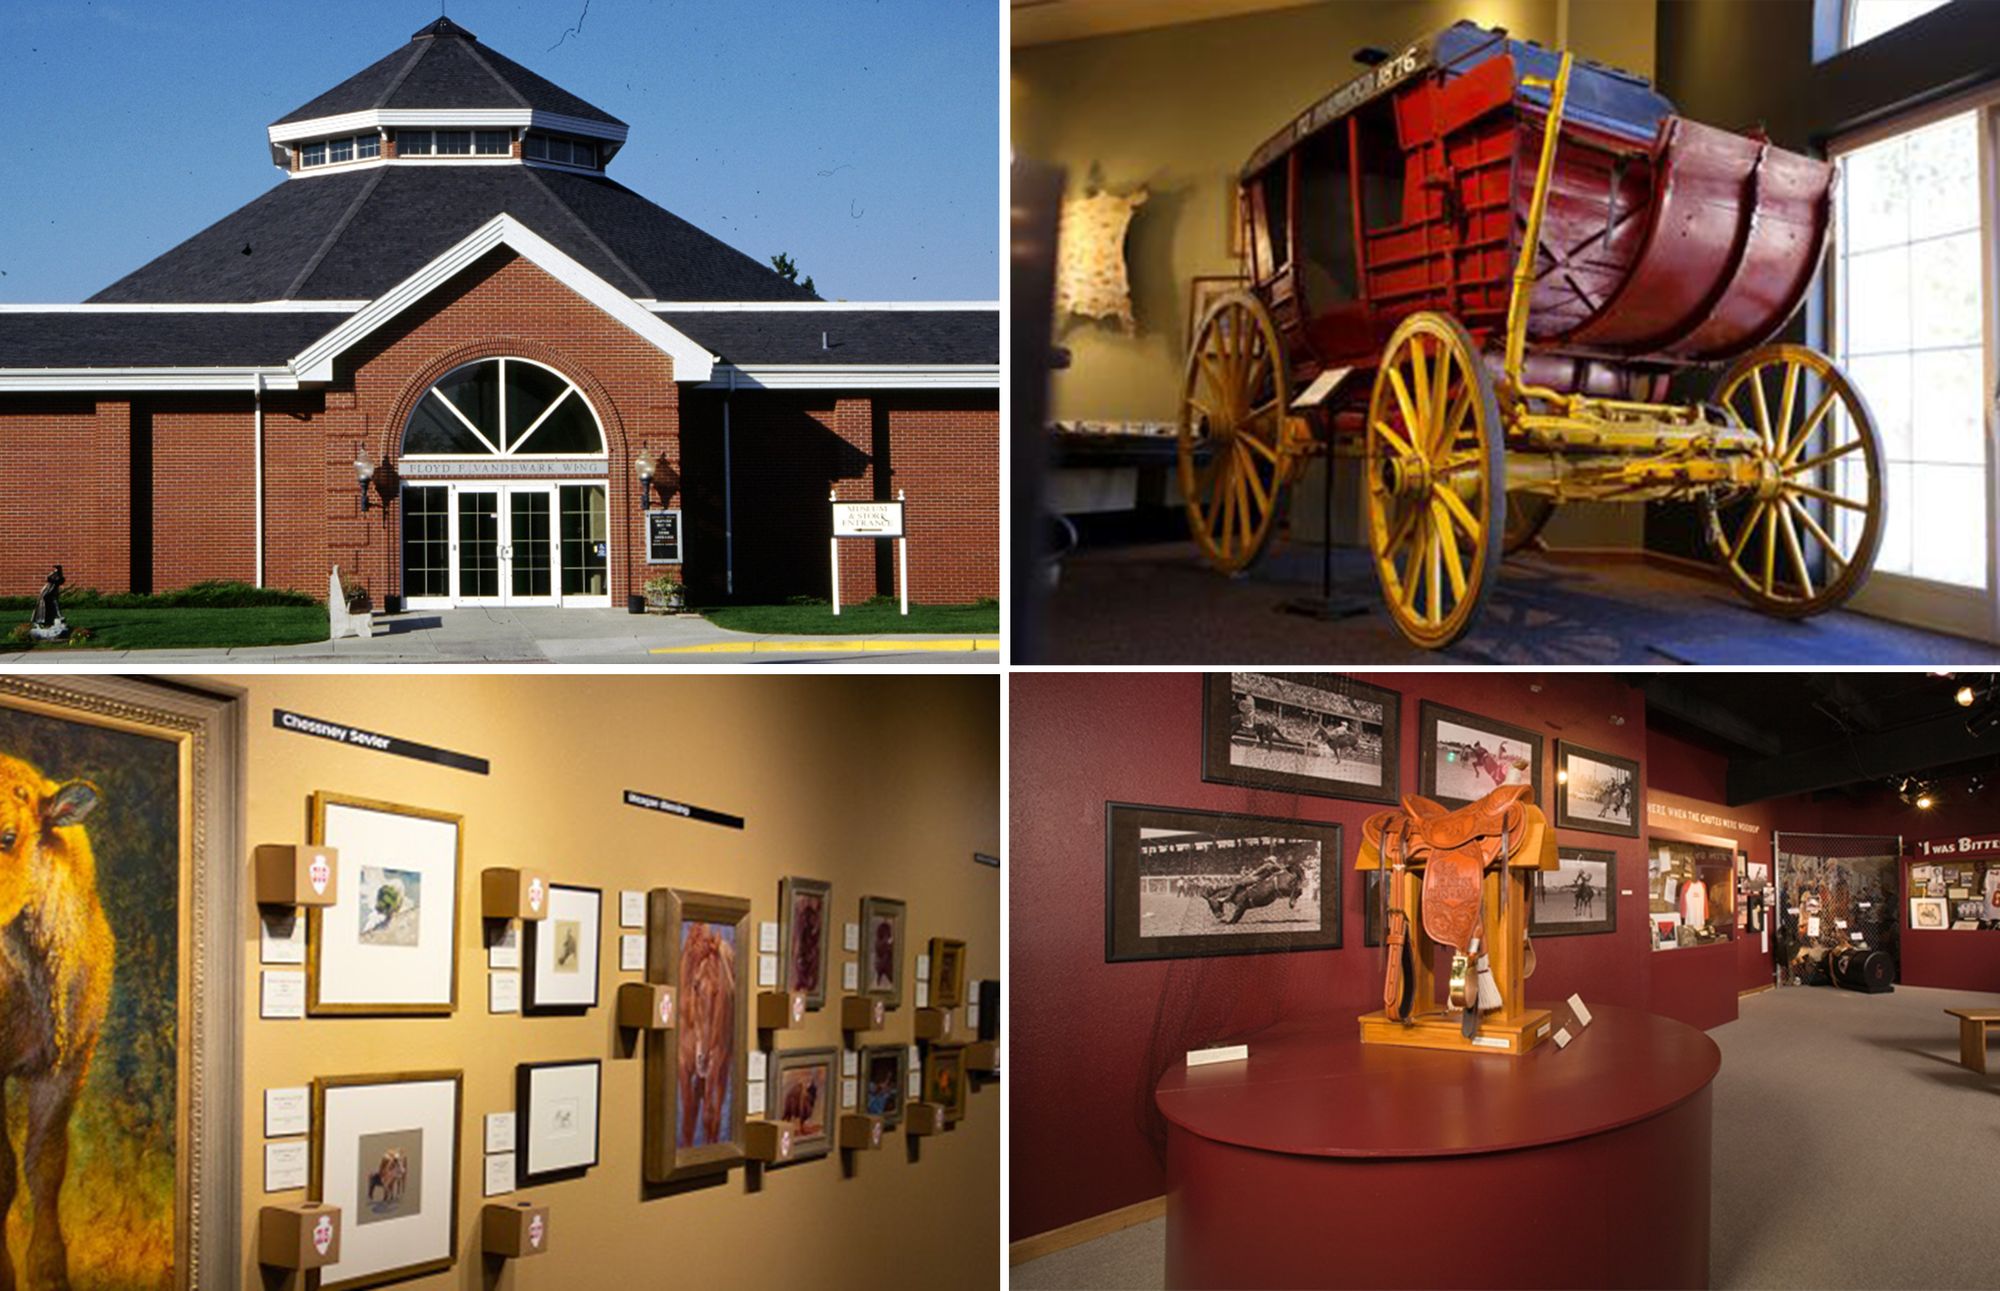 FREE Admission Day At The CFD Old West Museum